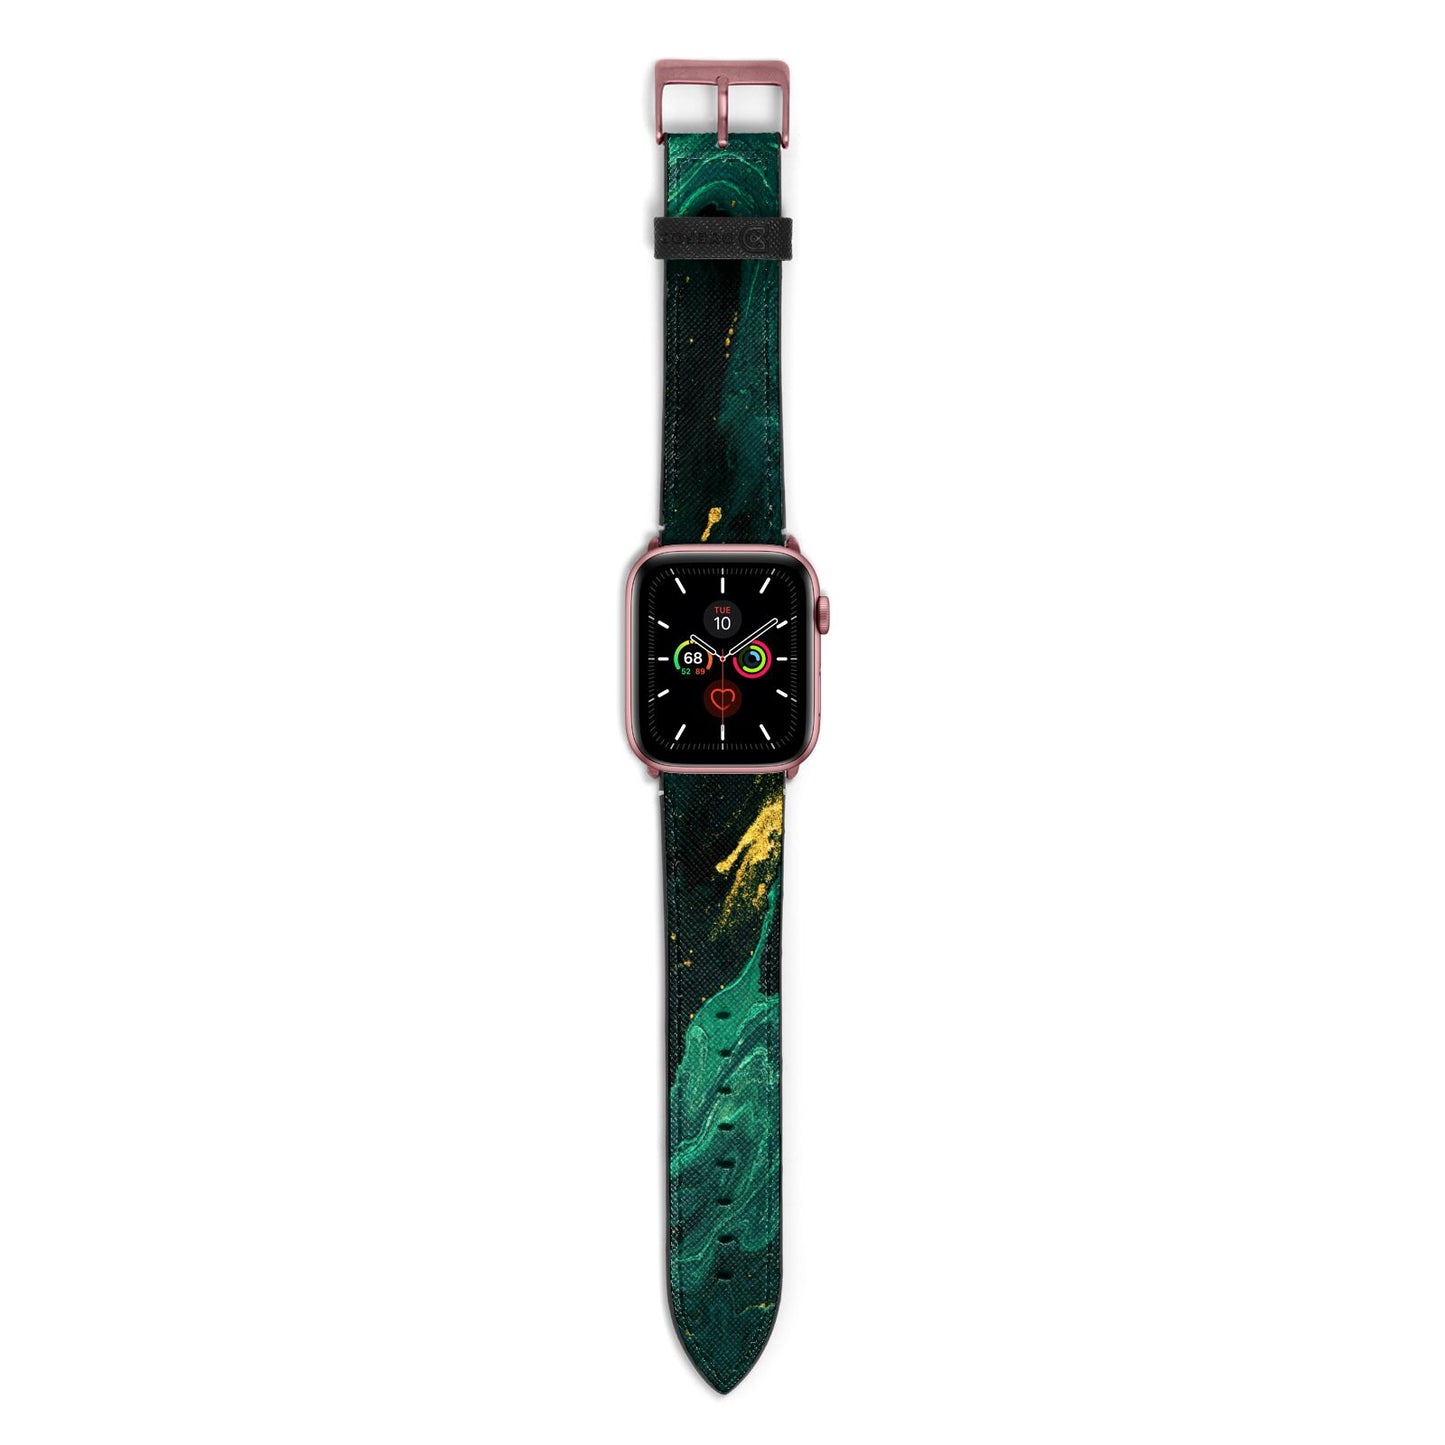 Emerald Green Apple Watch Strap with Rose Gold Hardware